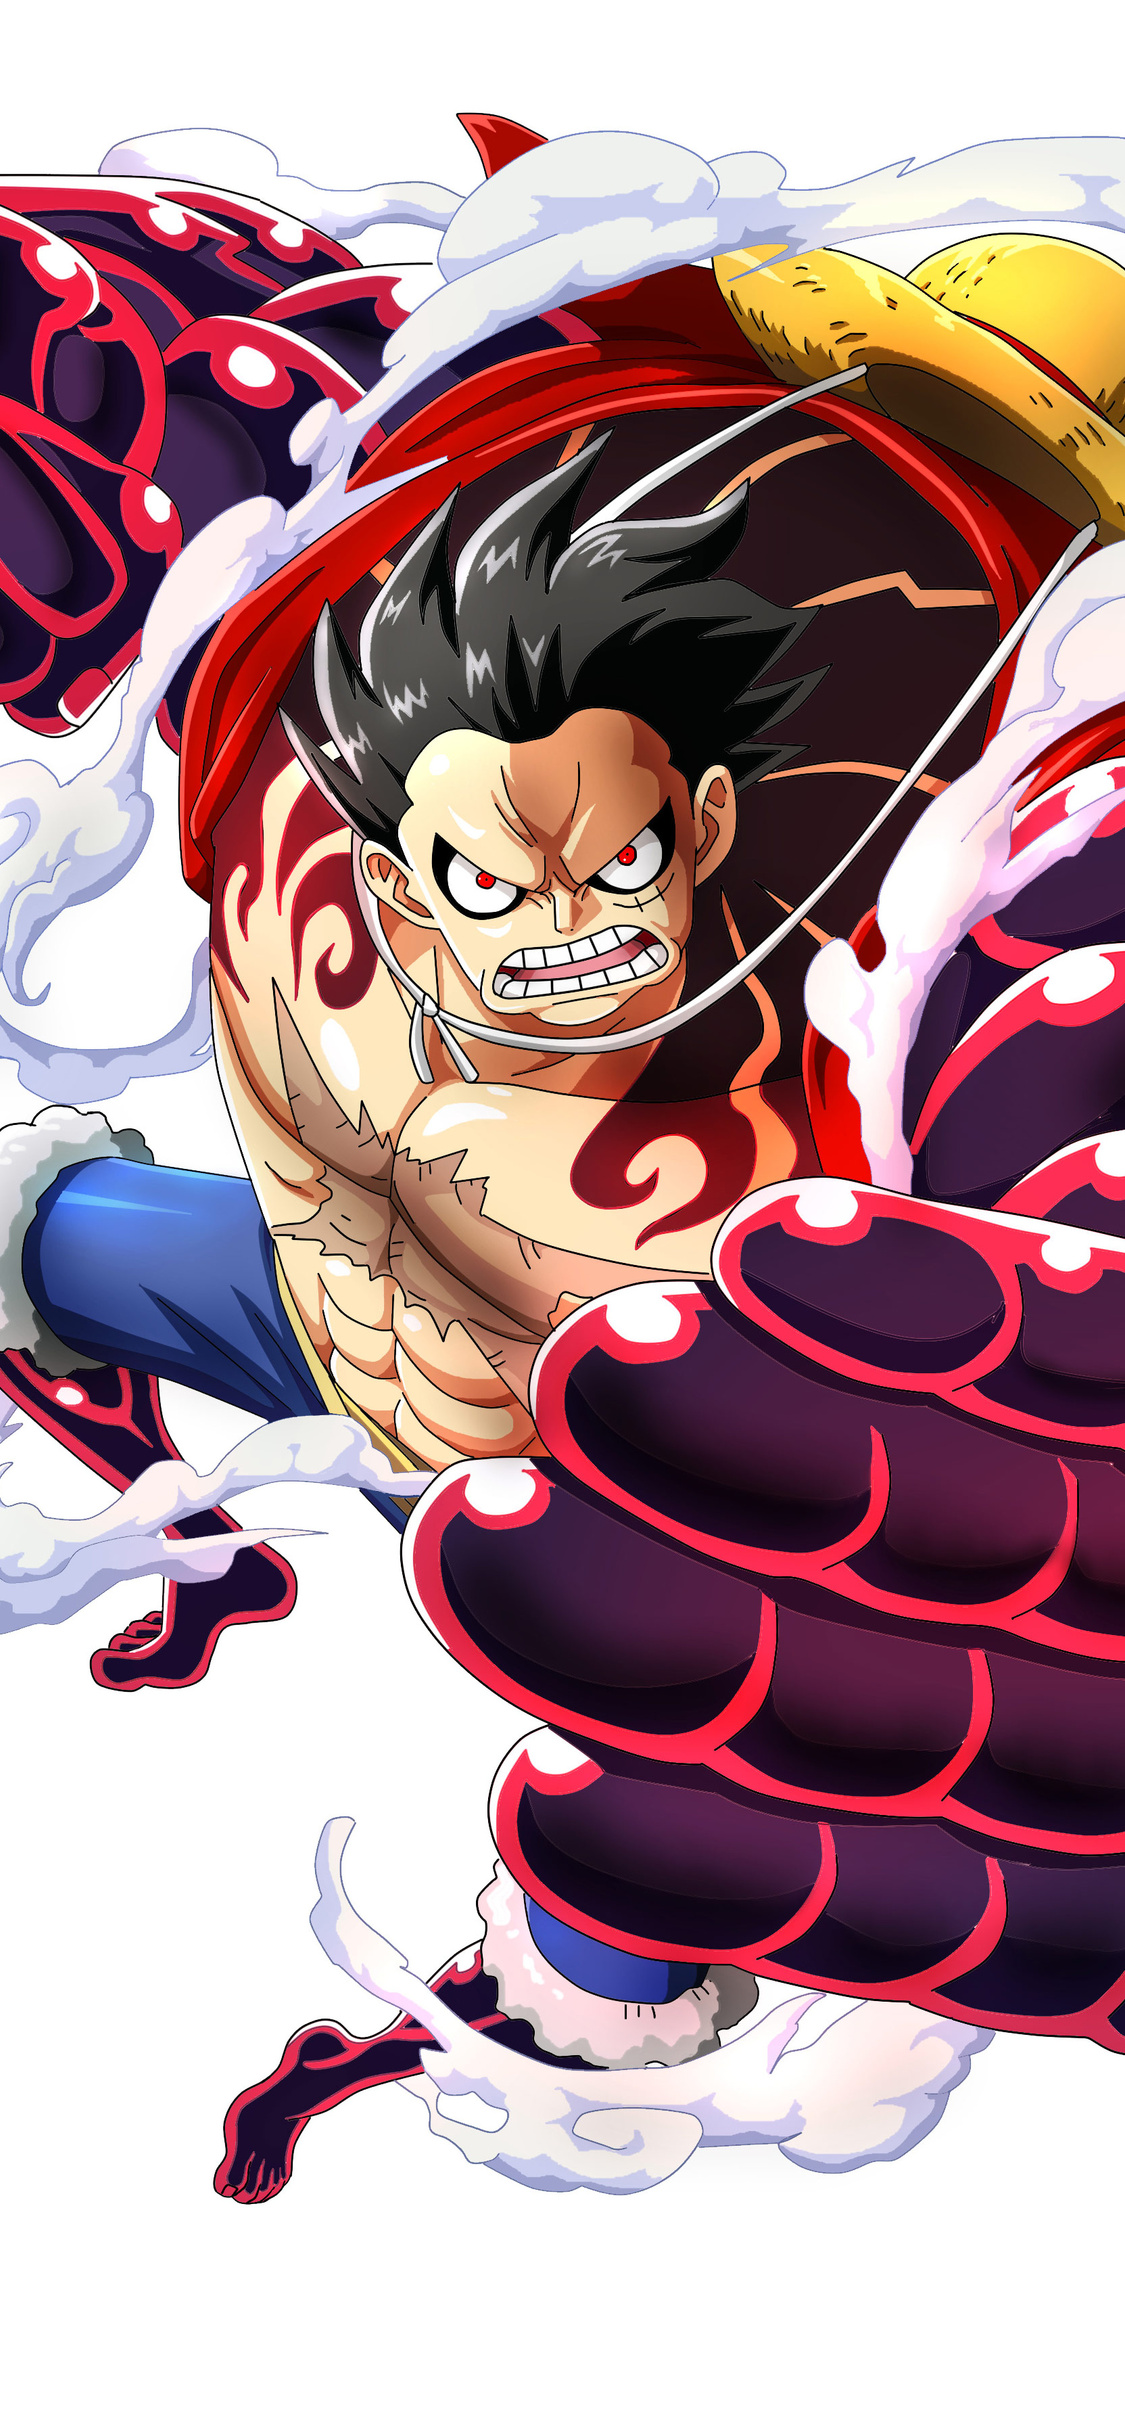 One Piece Luffy Wallpaper Iphone Hd Wallpaper Hd For Android